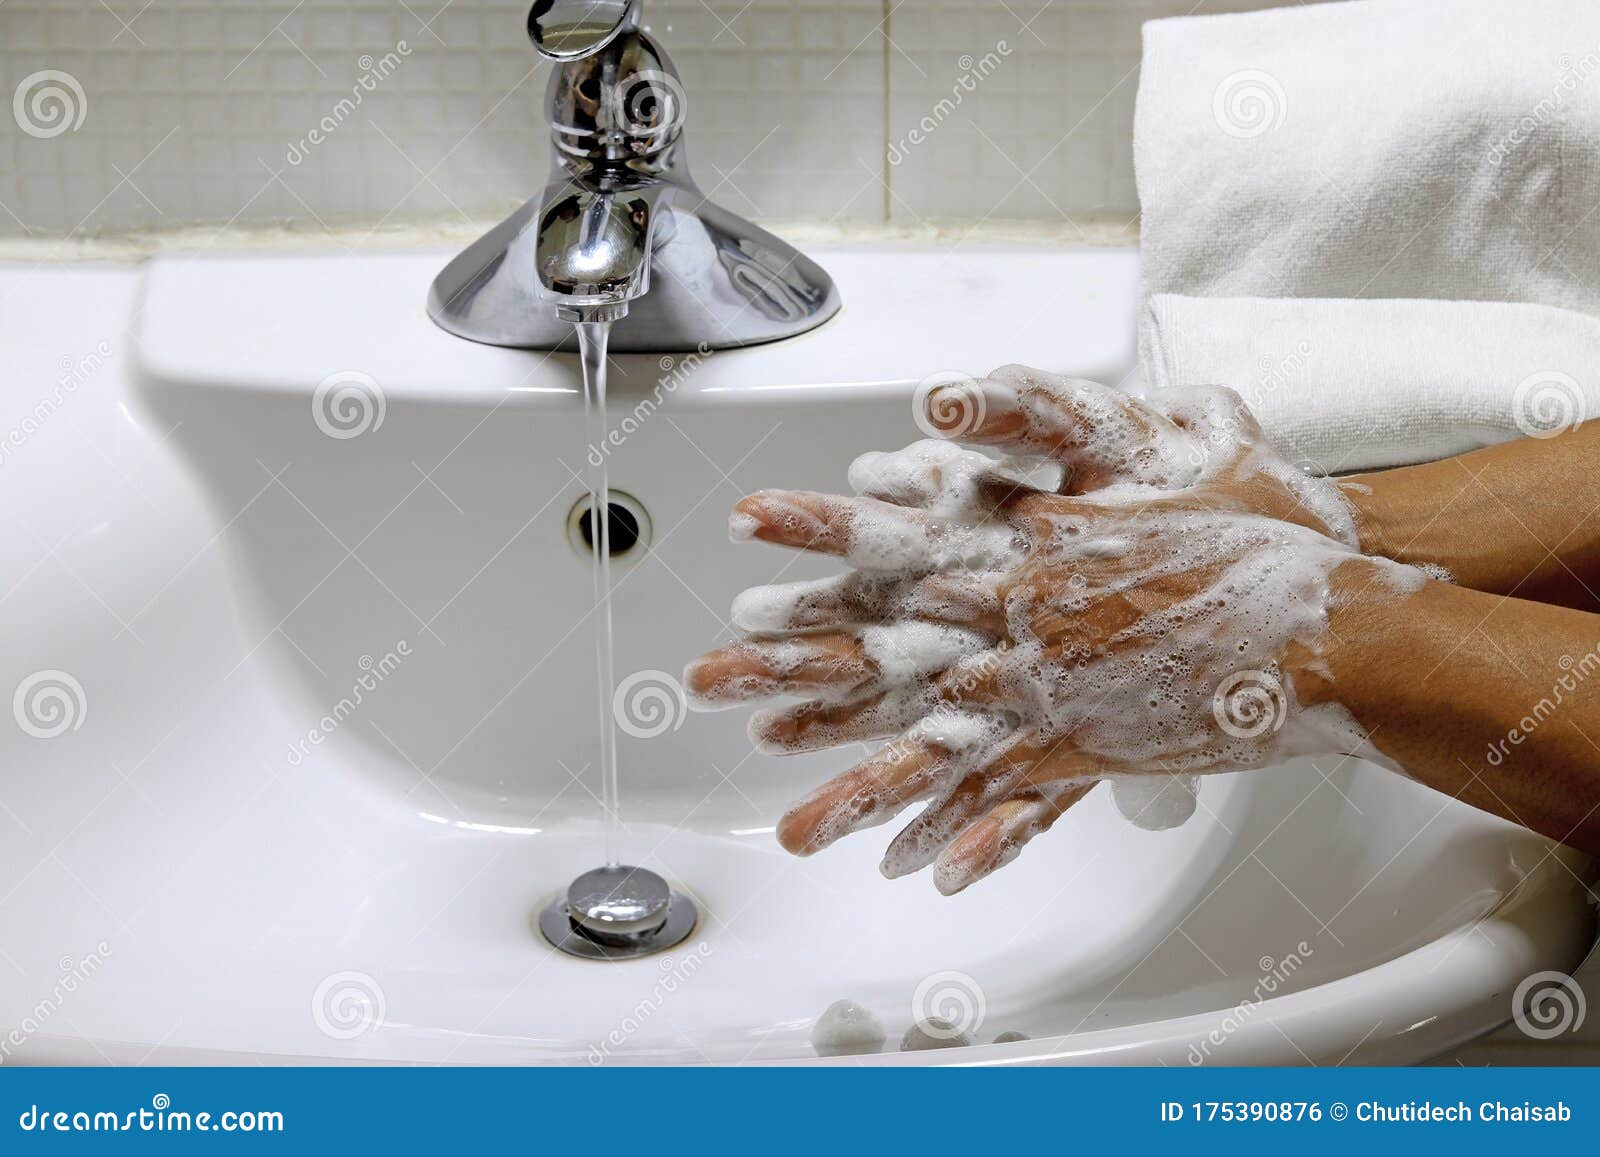 coronavirus pandemic prevention wash hands with soap warm water,concept to prevent the covid-19